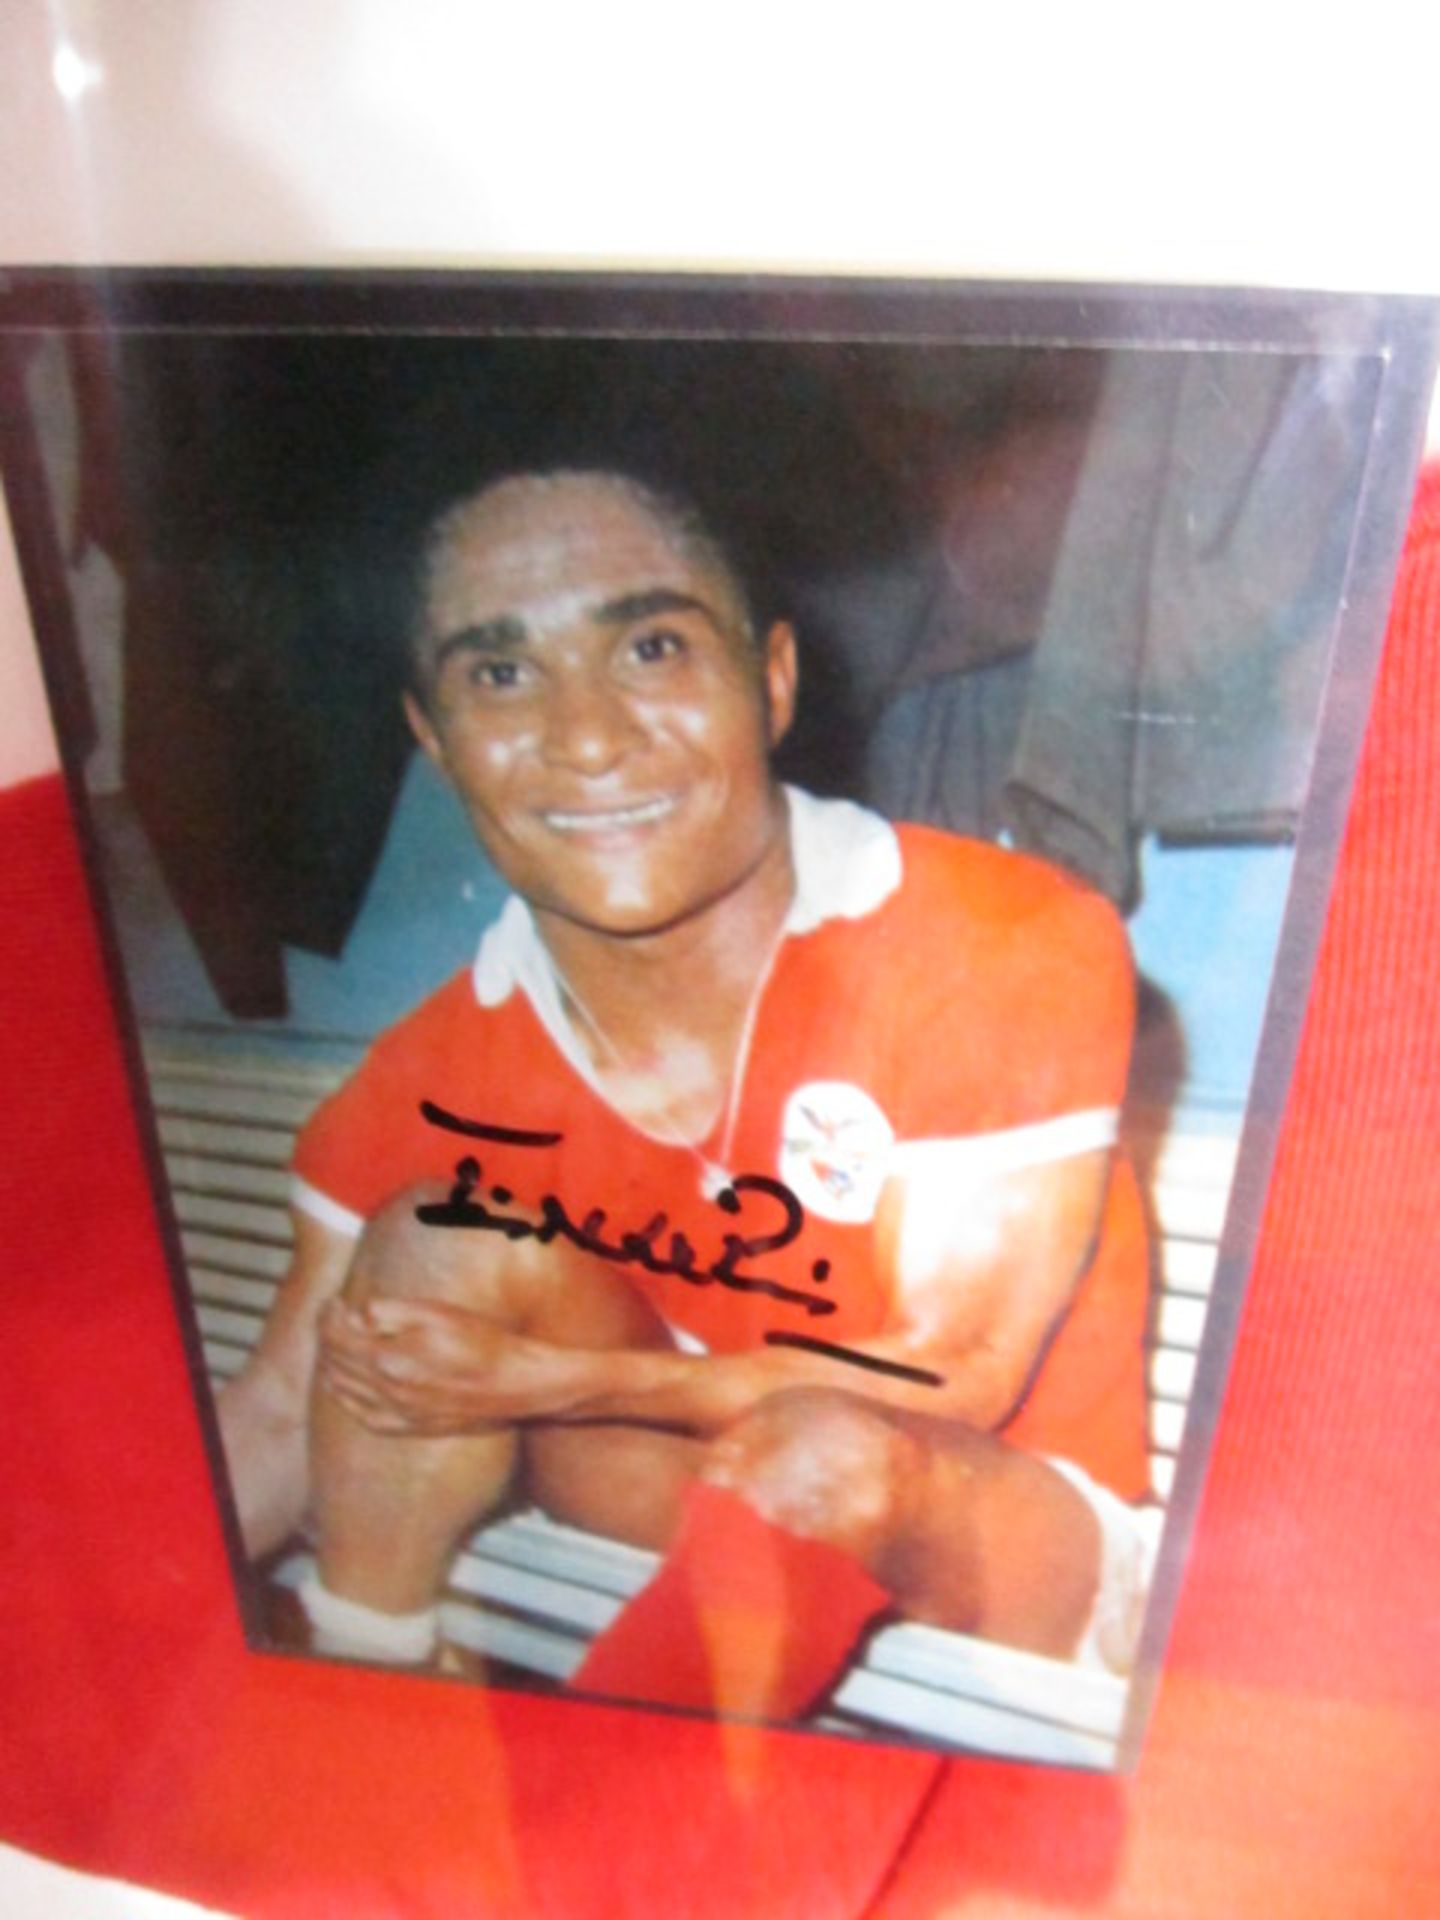 Eusebio: a red Benfica NO. 10 Shirt, signed and dated "EUSEBIO 28/7/69" , 38 in w x 33 in hgt - Image 6 of 6